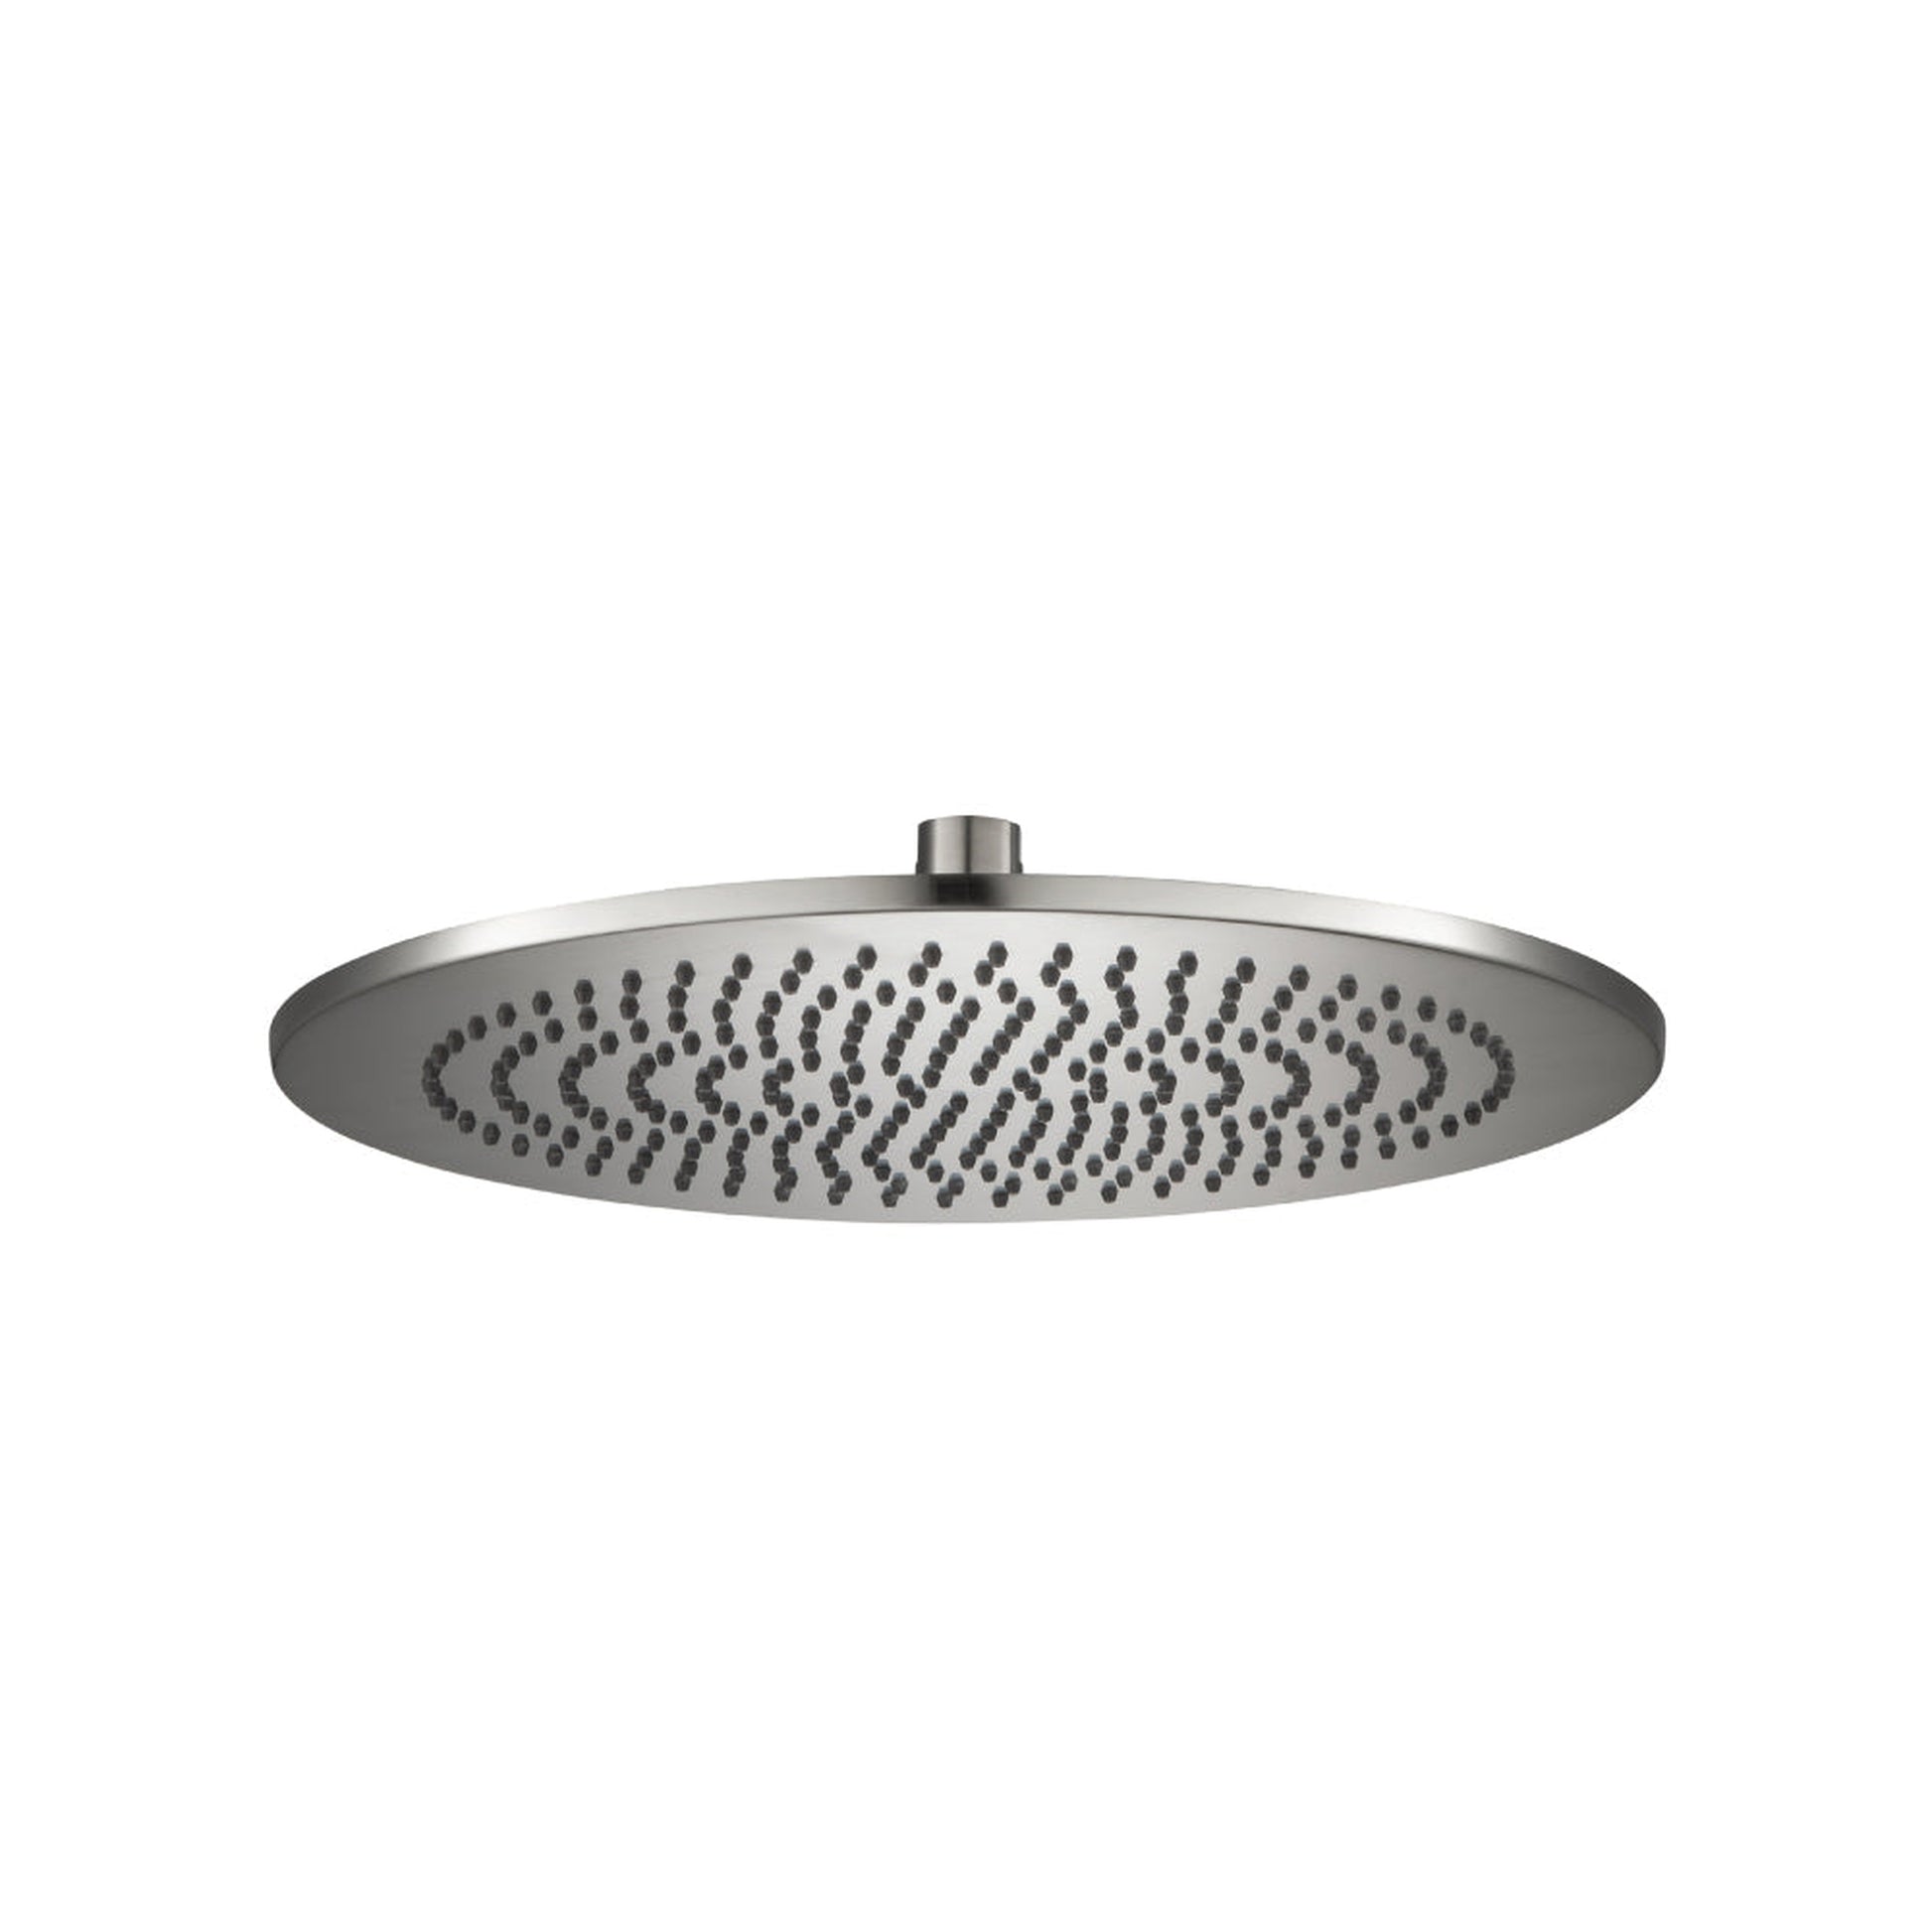 Isenberg Universal Fixtures 12" Single Function Round Brushed Nickel PVD Solid Brass Rain Shower Head With 6" Ceiling Mounted Shower Arm